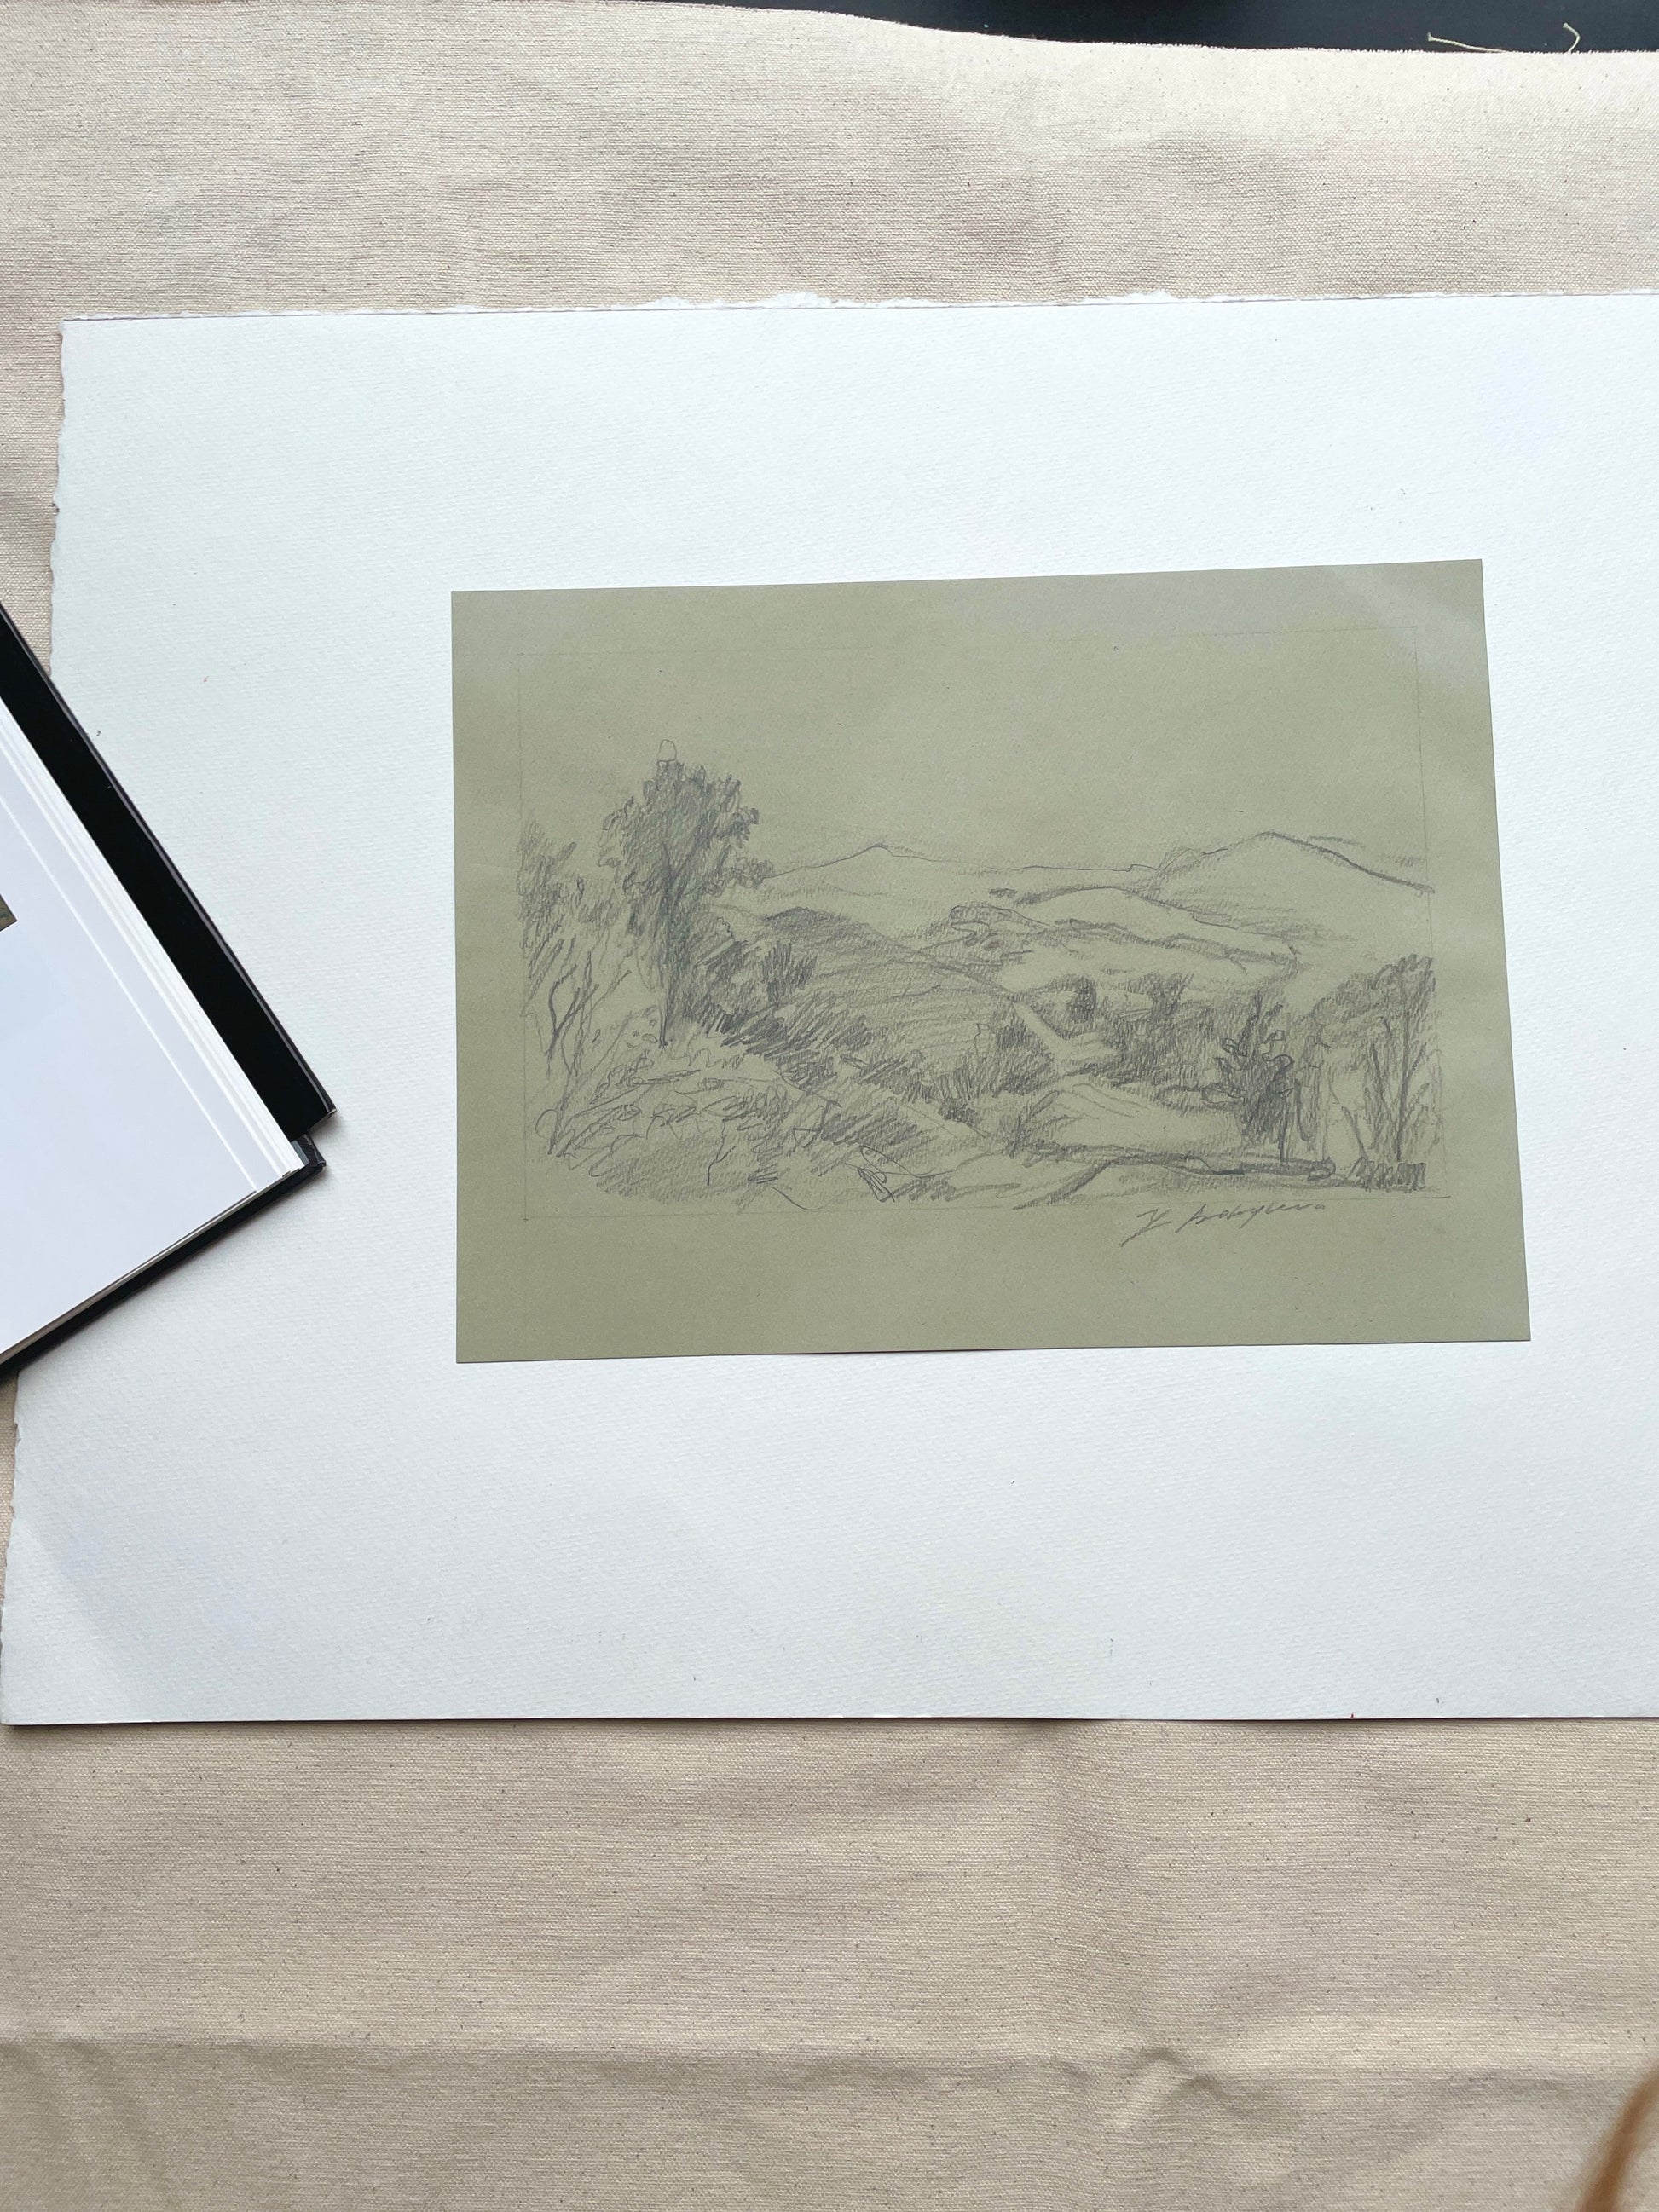 Early morning view of hills and trees in pencil